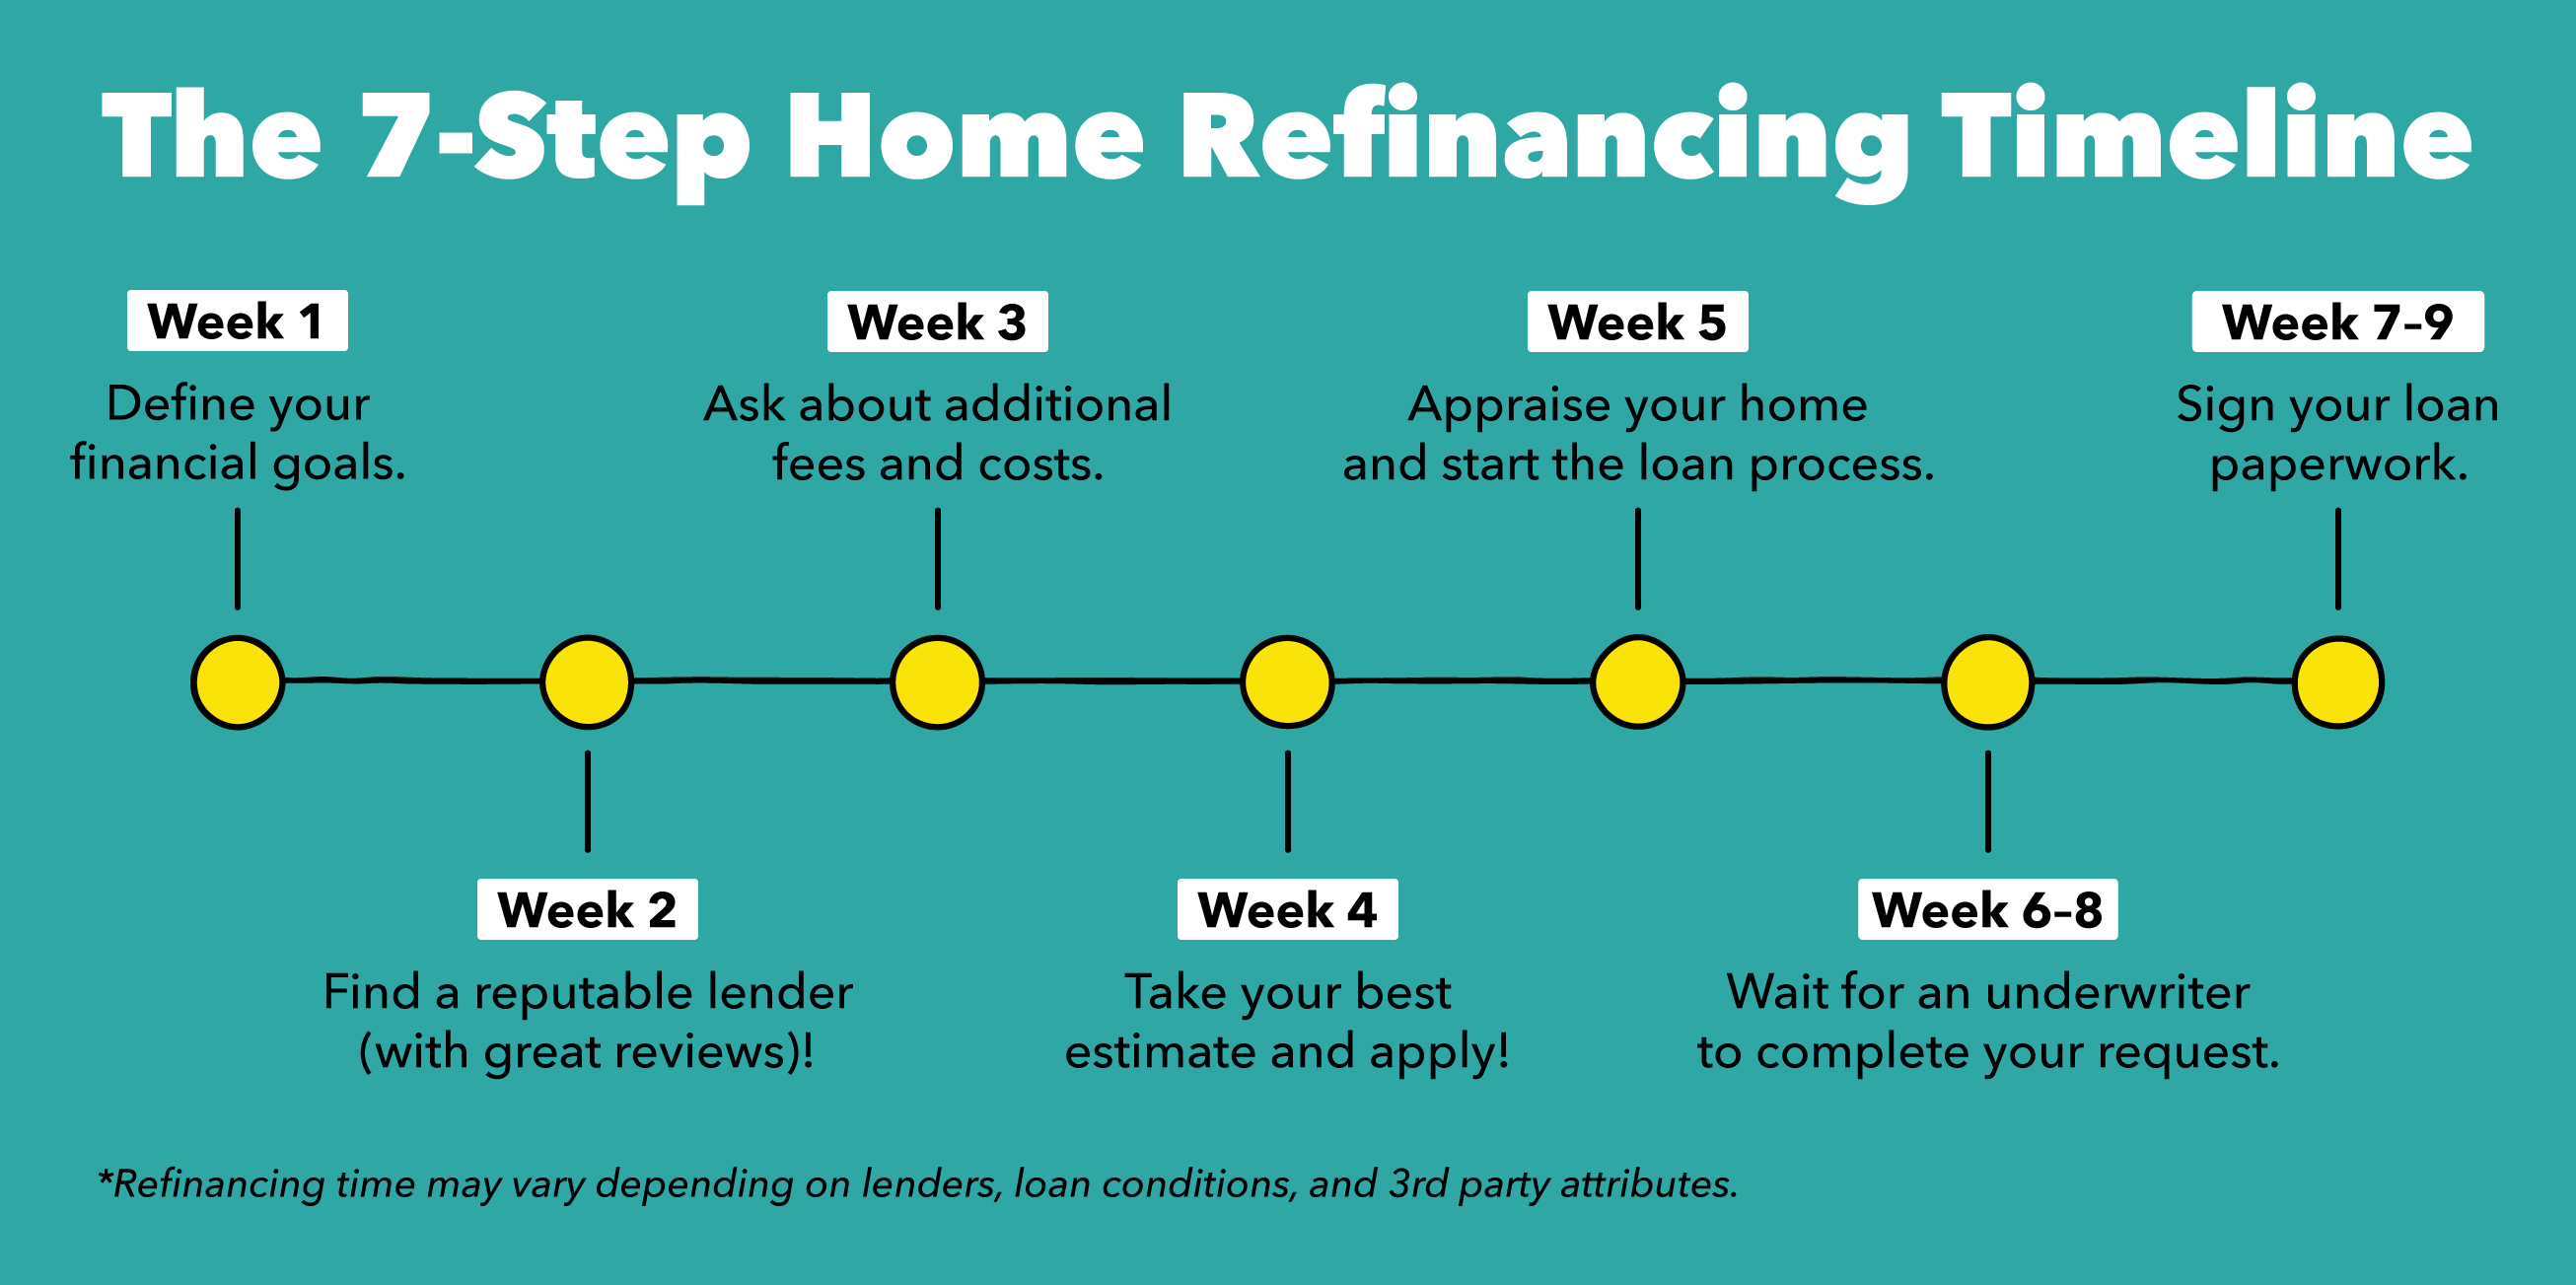 The 7-step timeline for home refinancing